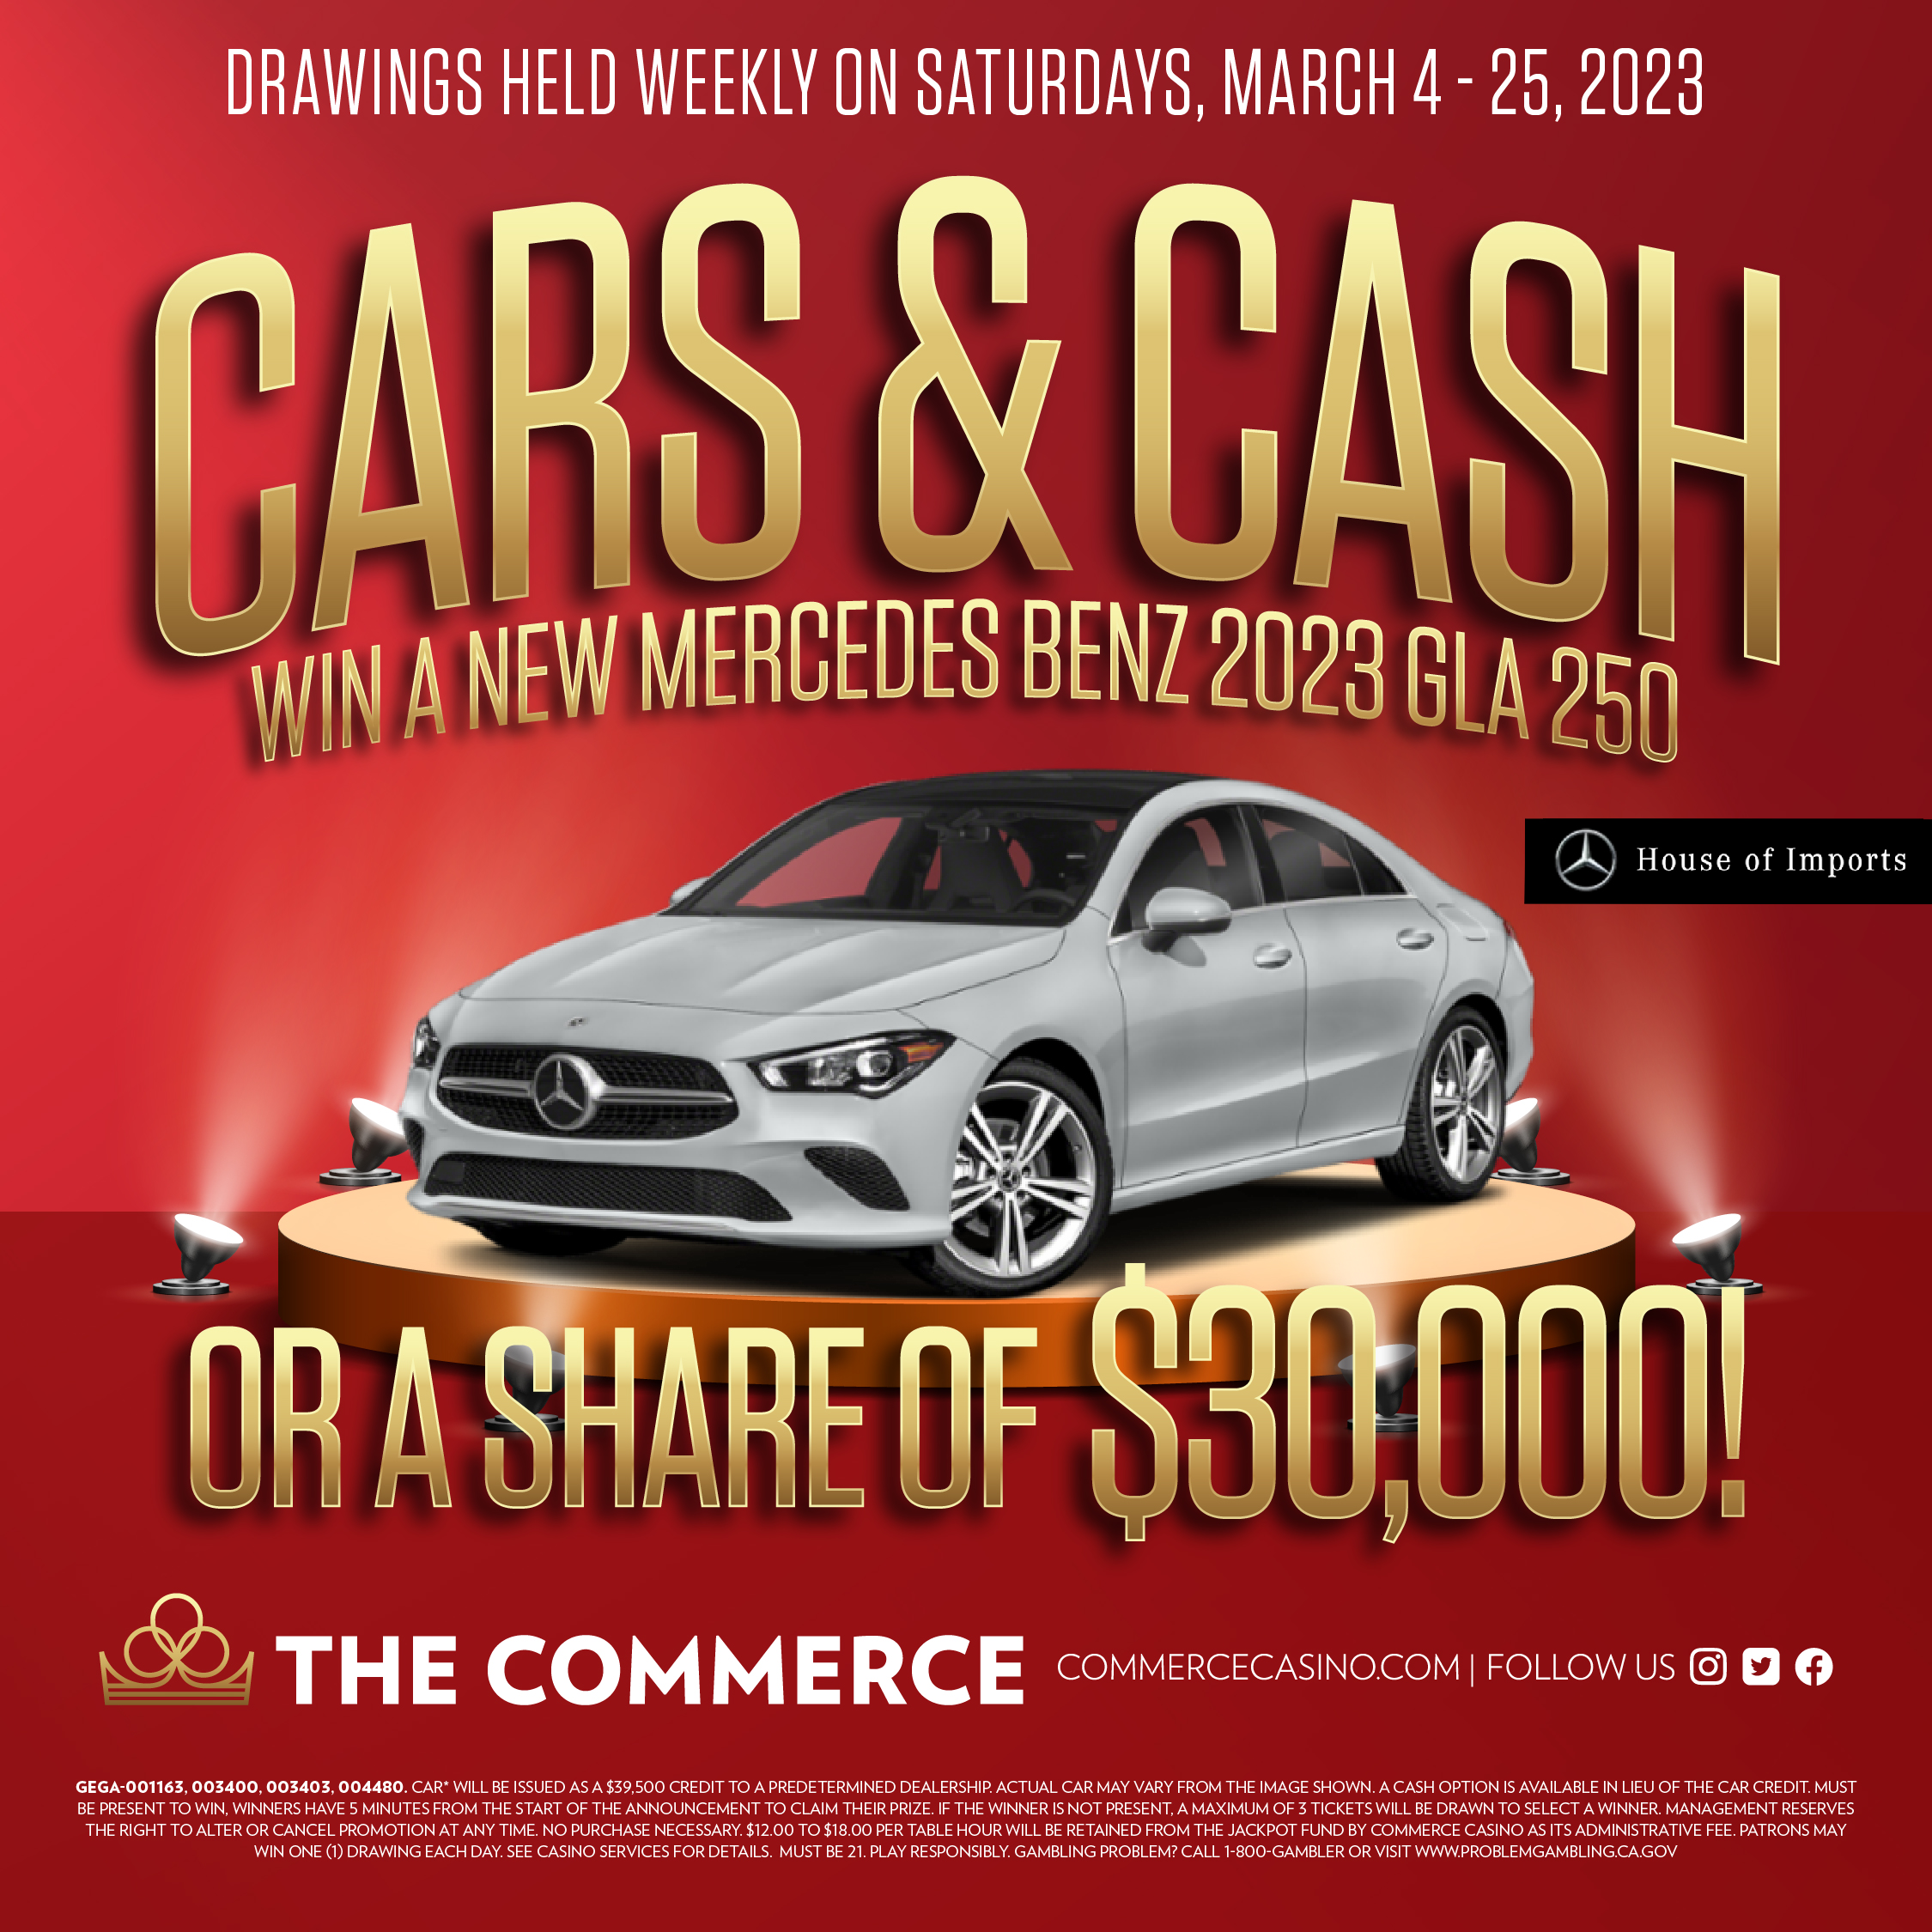 Cars & Cash at The Commerce